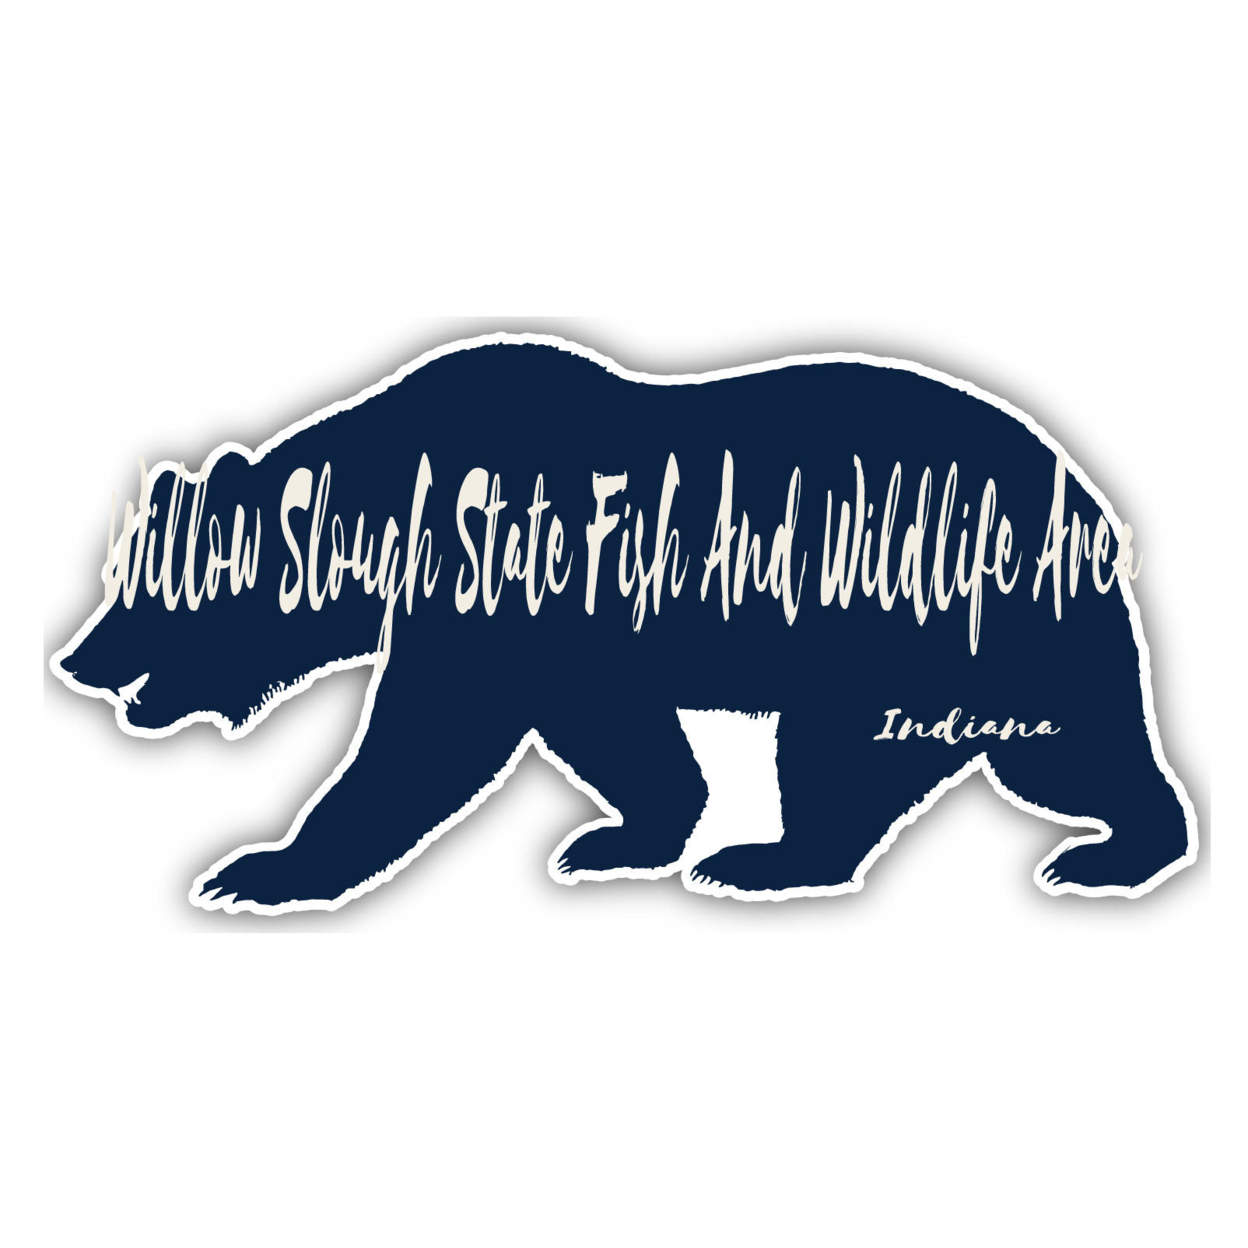 Willow Slough State Fish And Wildlife Area Indiana Souvenir Decorative Stickers (Choose Theme And Size) - Single Unit, 4-Inch, Bear